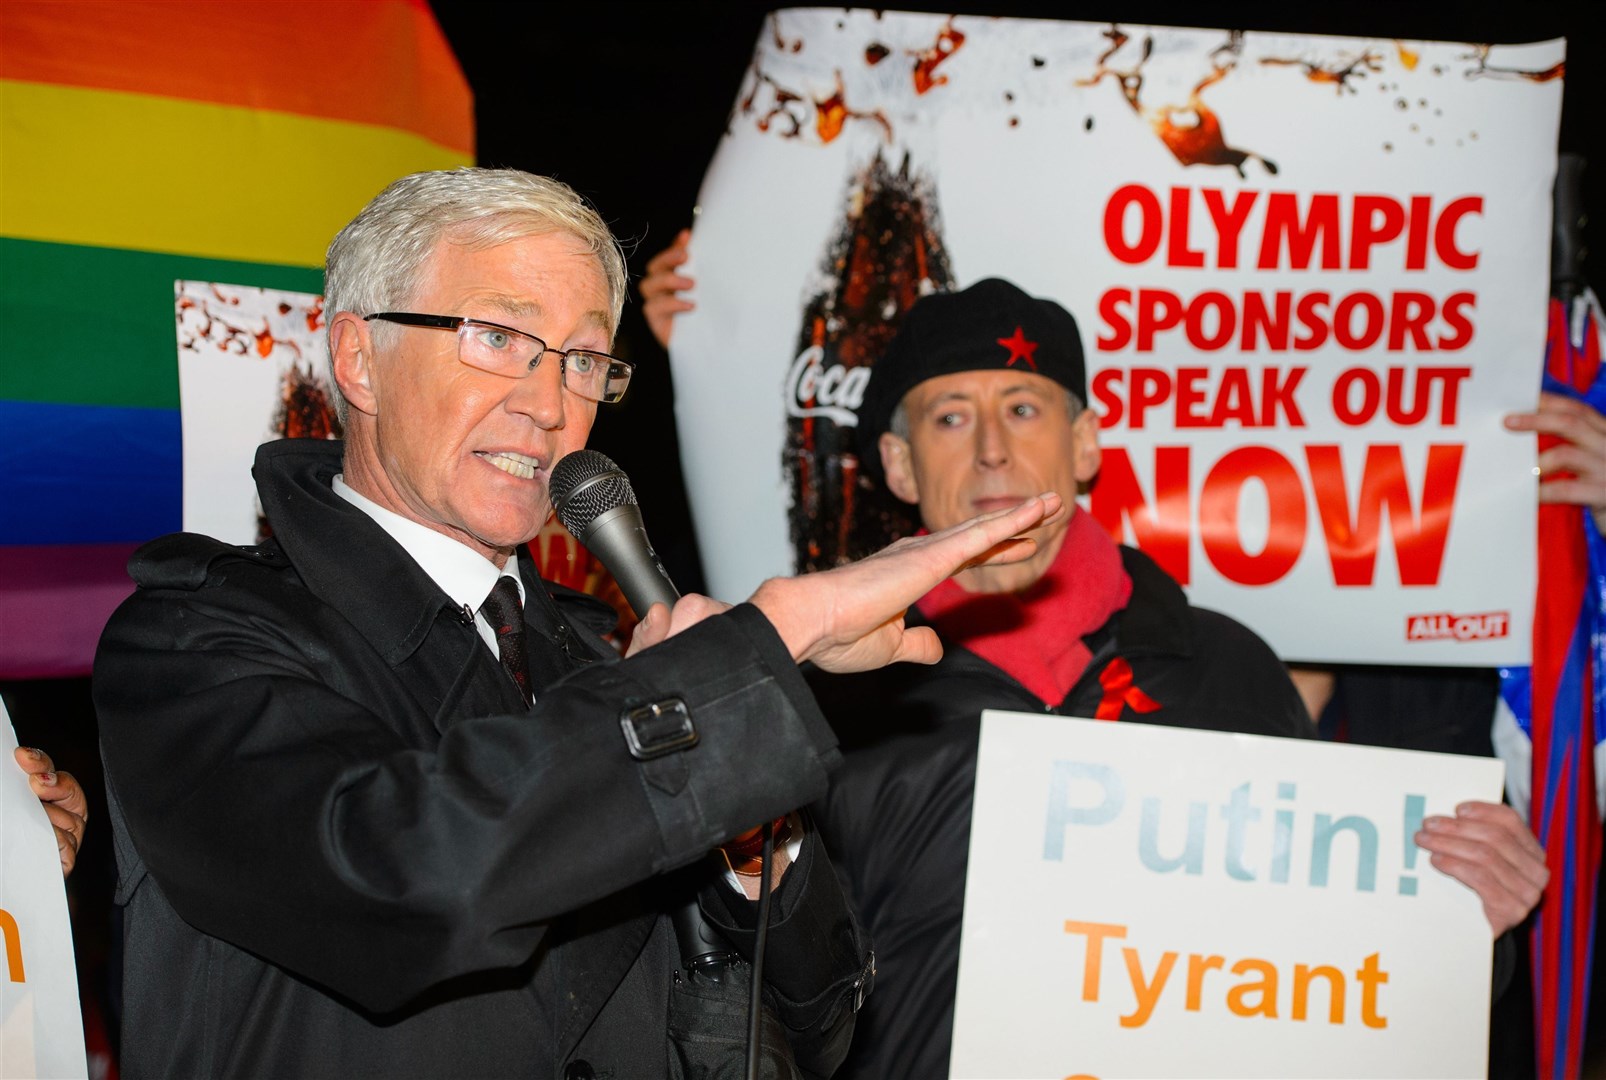 O’Grady was a staunch defender of LGBT+ rights. In 2014 he spoke alongside Peter Tatchell at a demonstration outside Downing Street, calling for corporate sponsors of the Sochi Winter Olympics to denounce Russia’s anti-gay laws (Dominic Lipinski/PA)